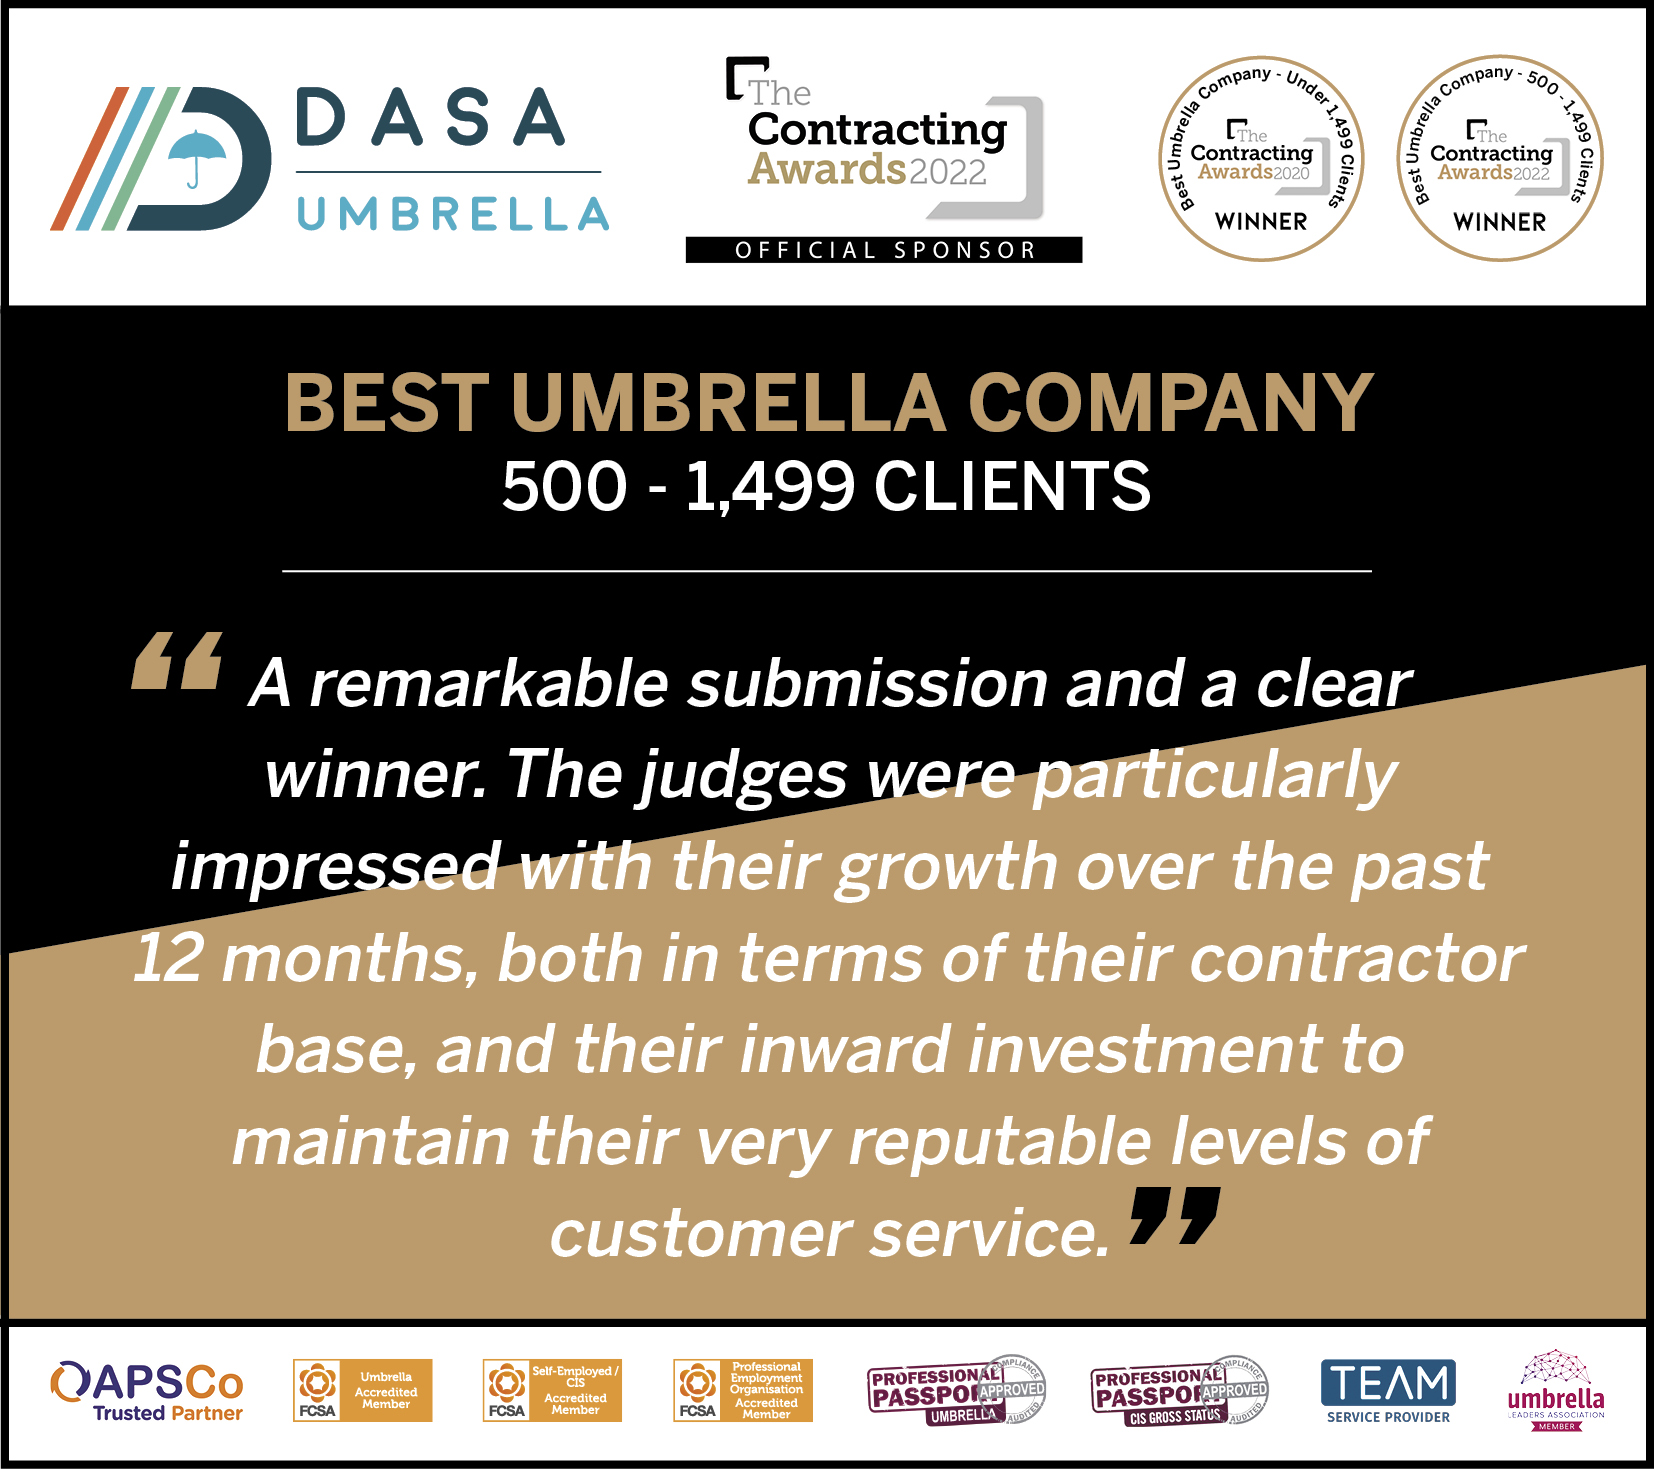 DASA WIN BEST UMBRELLA COMPANY (500 – 1,499 Clients)  AT THE CONTRACTING AWARDS 2022